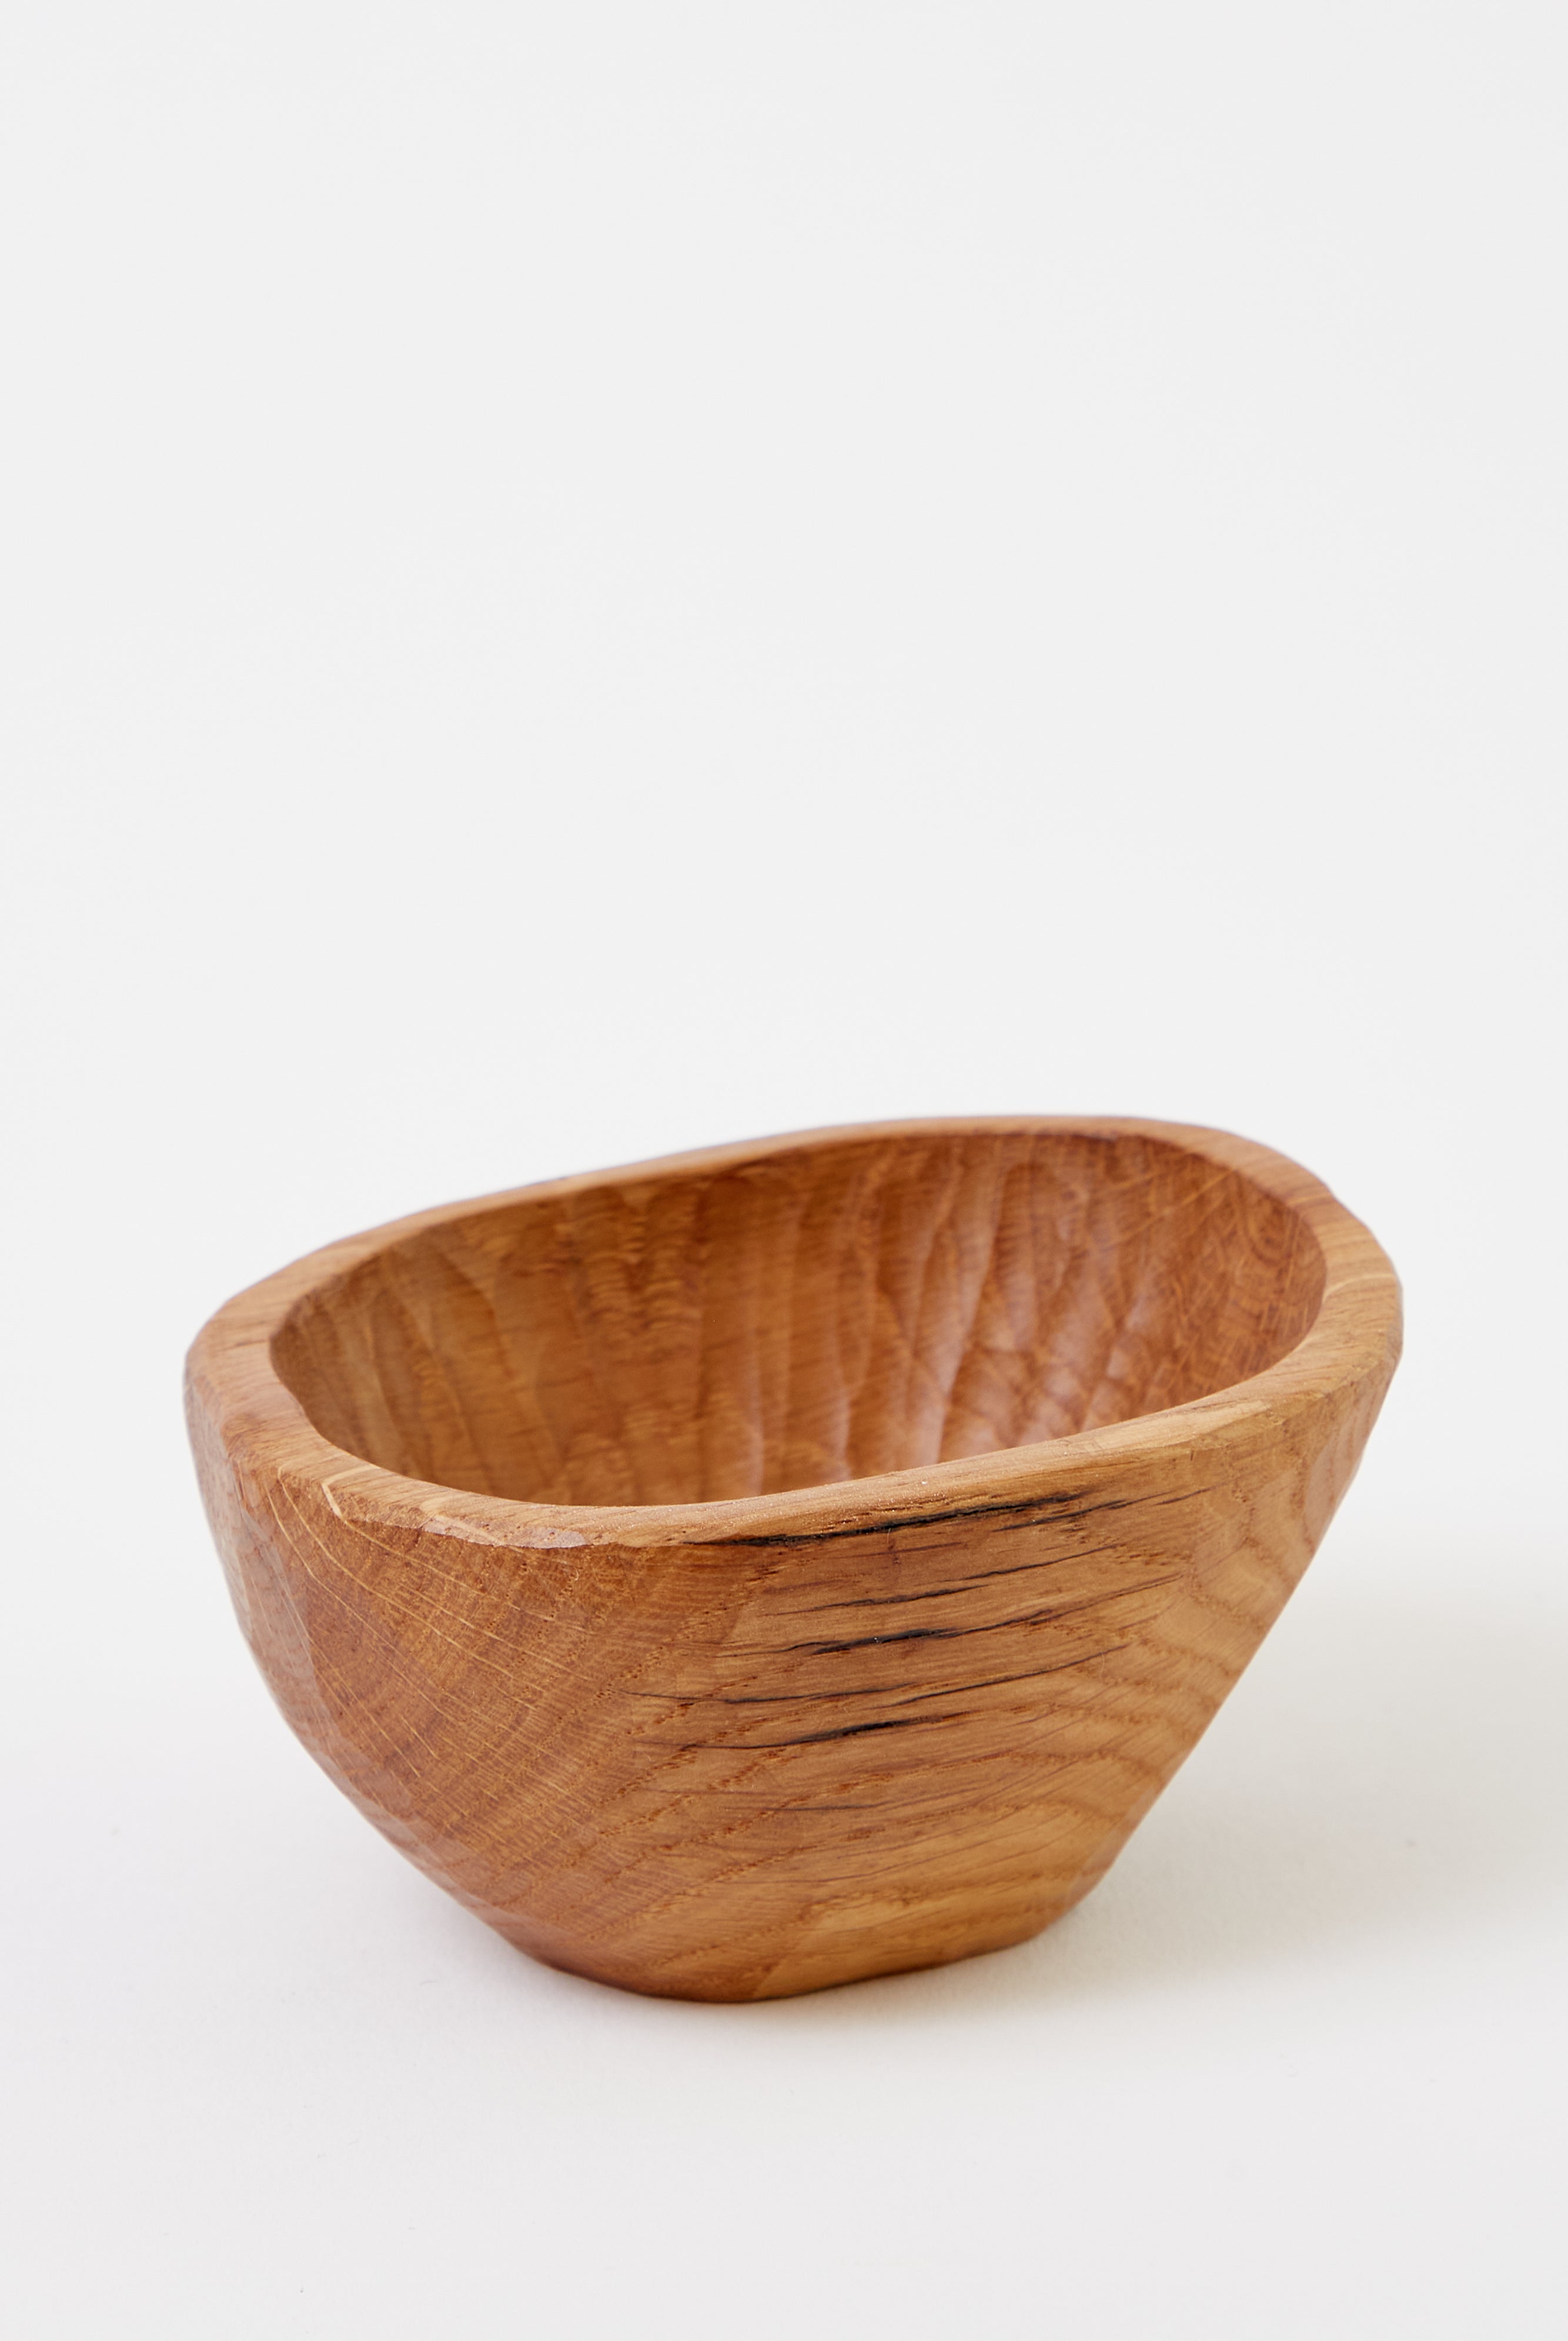 Alex Walshaw Small Reclaimed Bowl in Natural